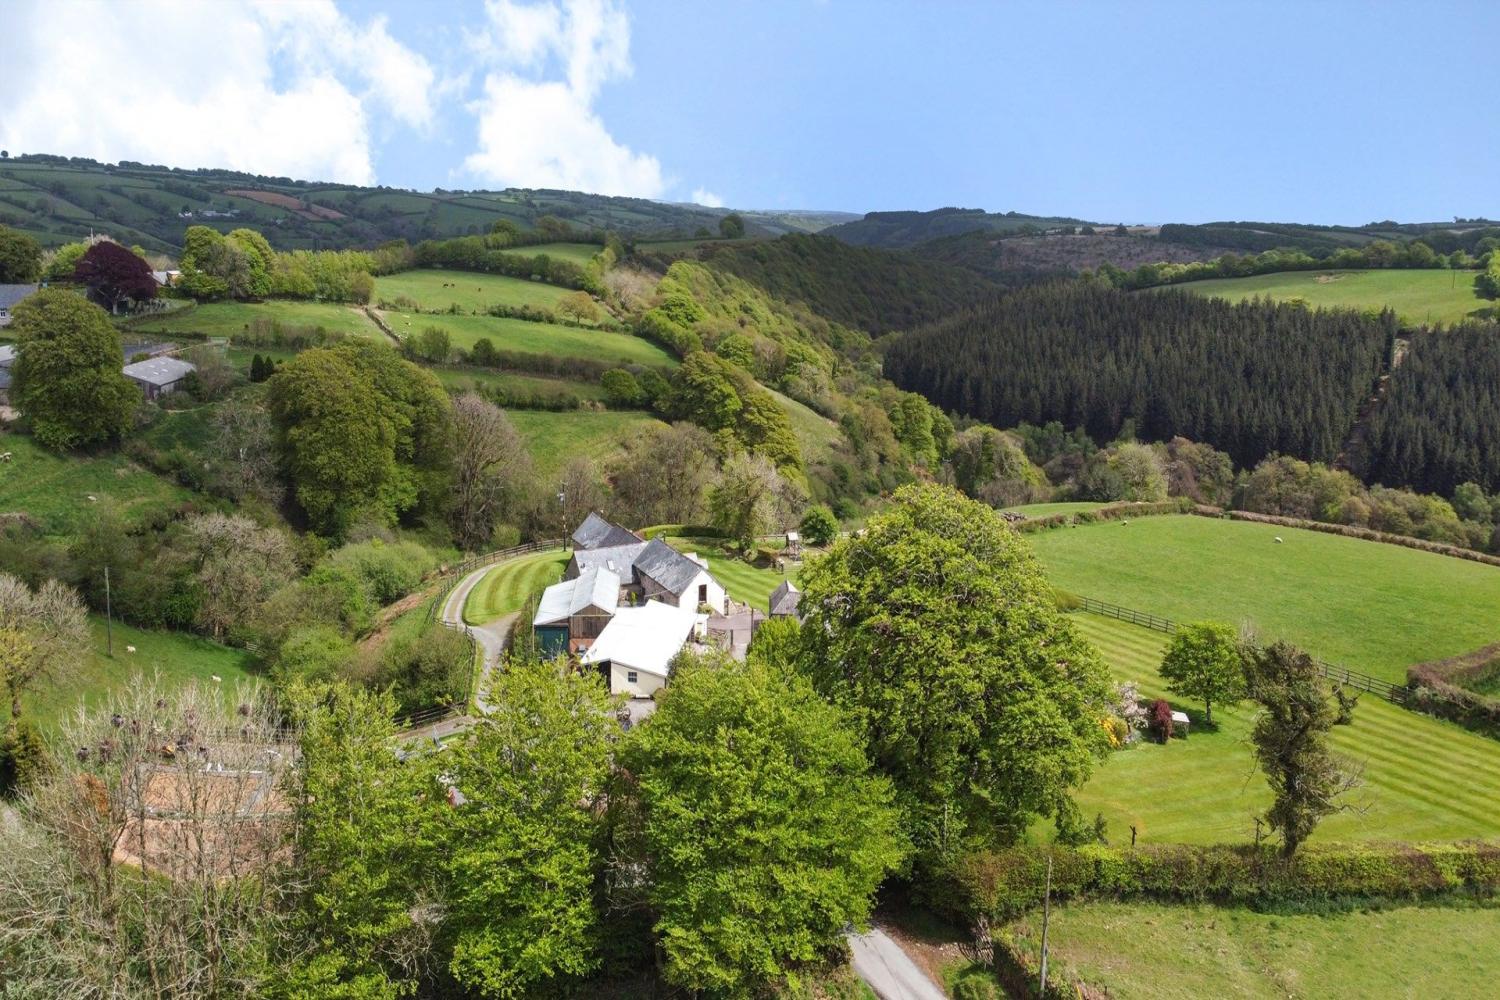 West Hollowcombe Farm & Cottages from above